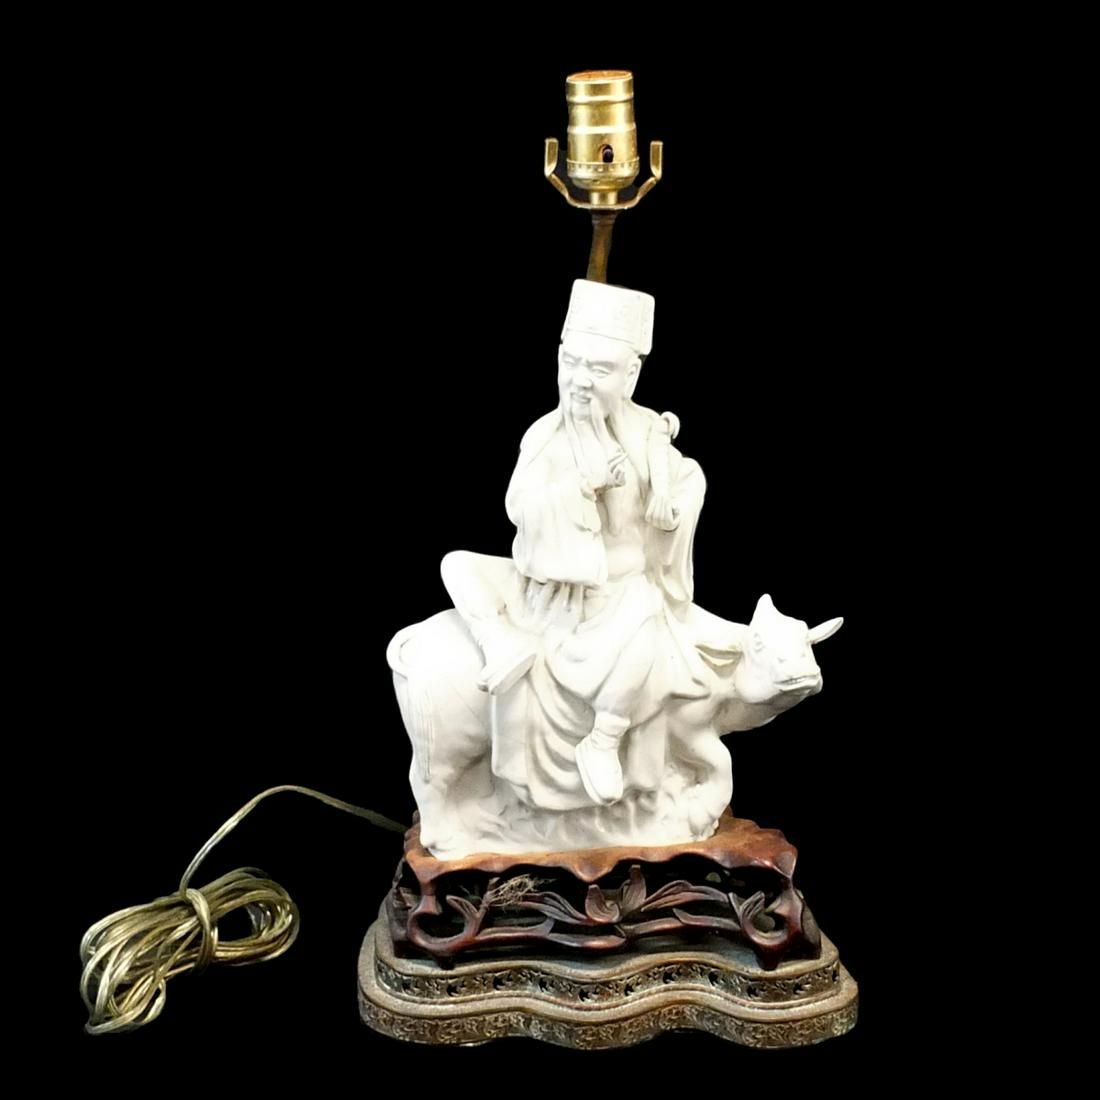 ANTIQUE CHINESE FIGURINE PRESENTED 3d2a2d